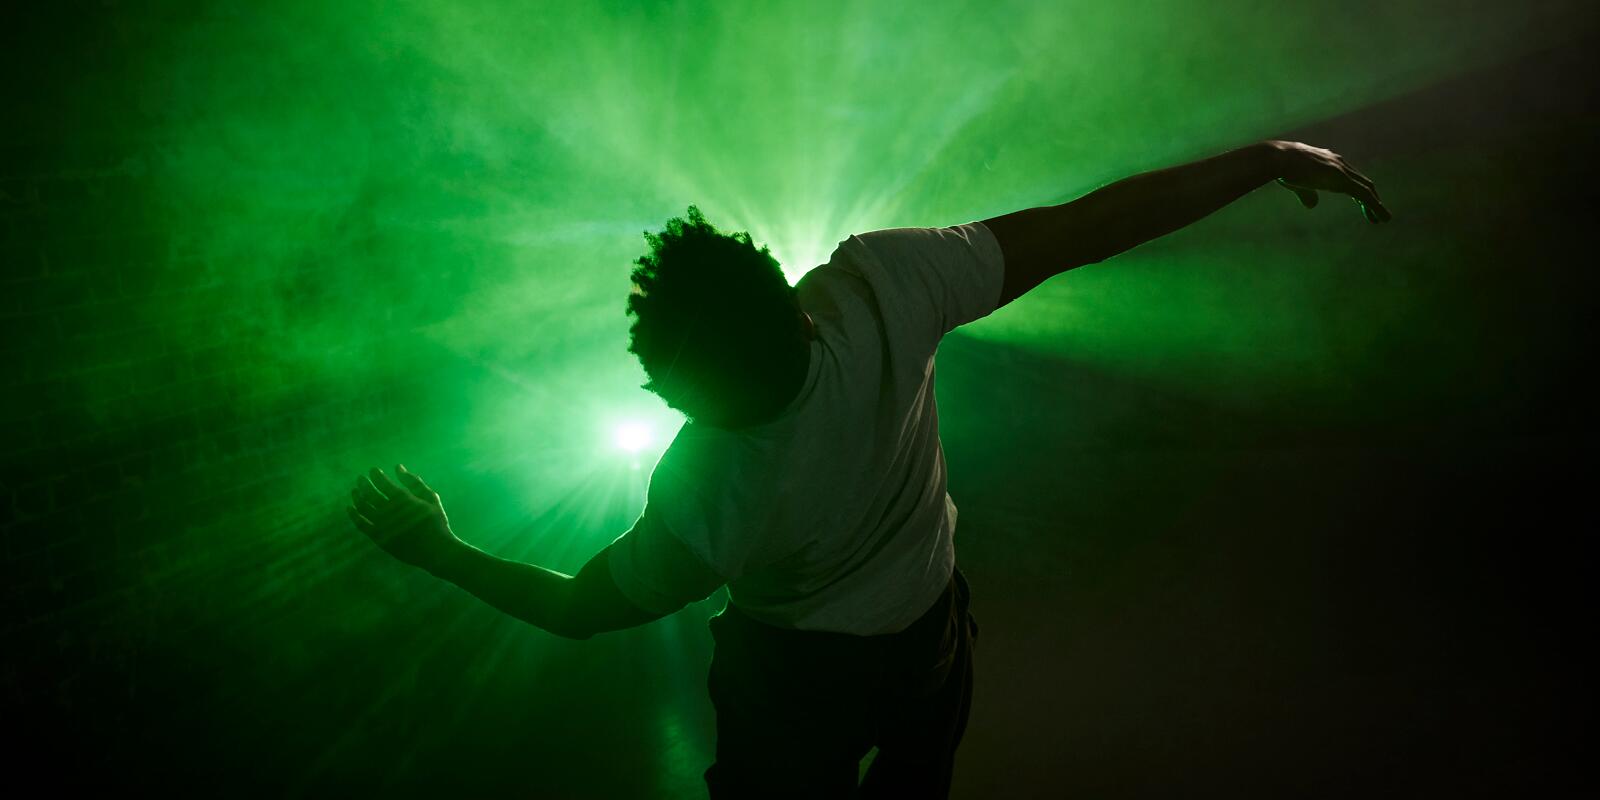 A dancer in movement silhouetted against green light